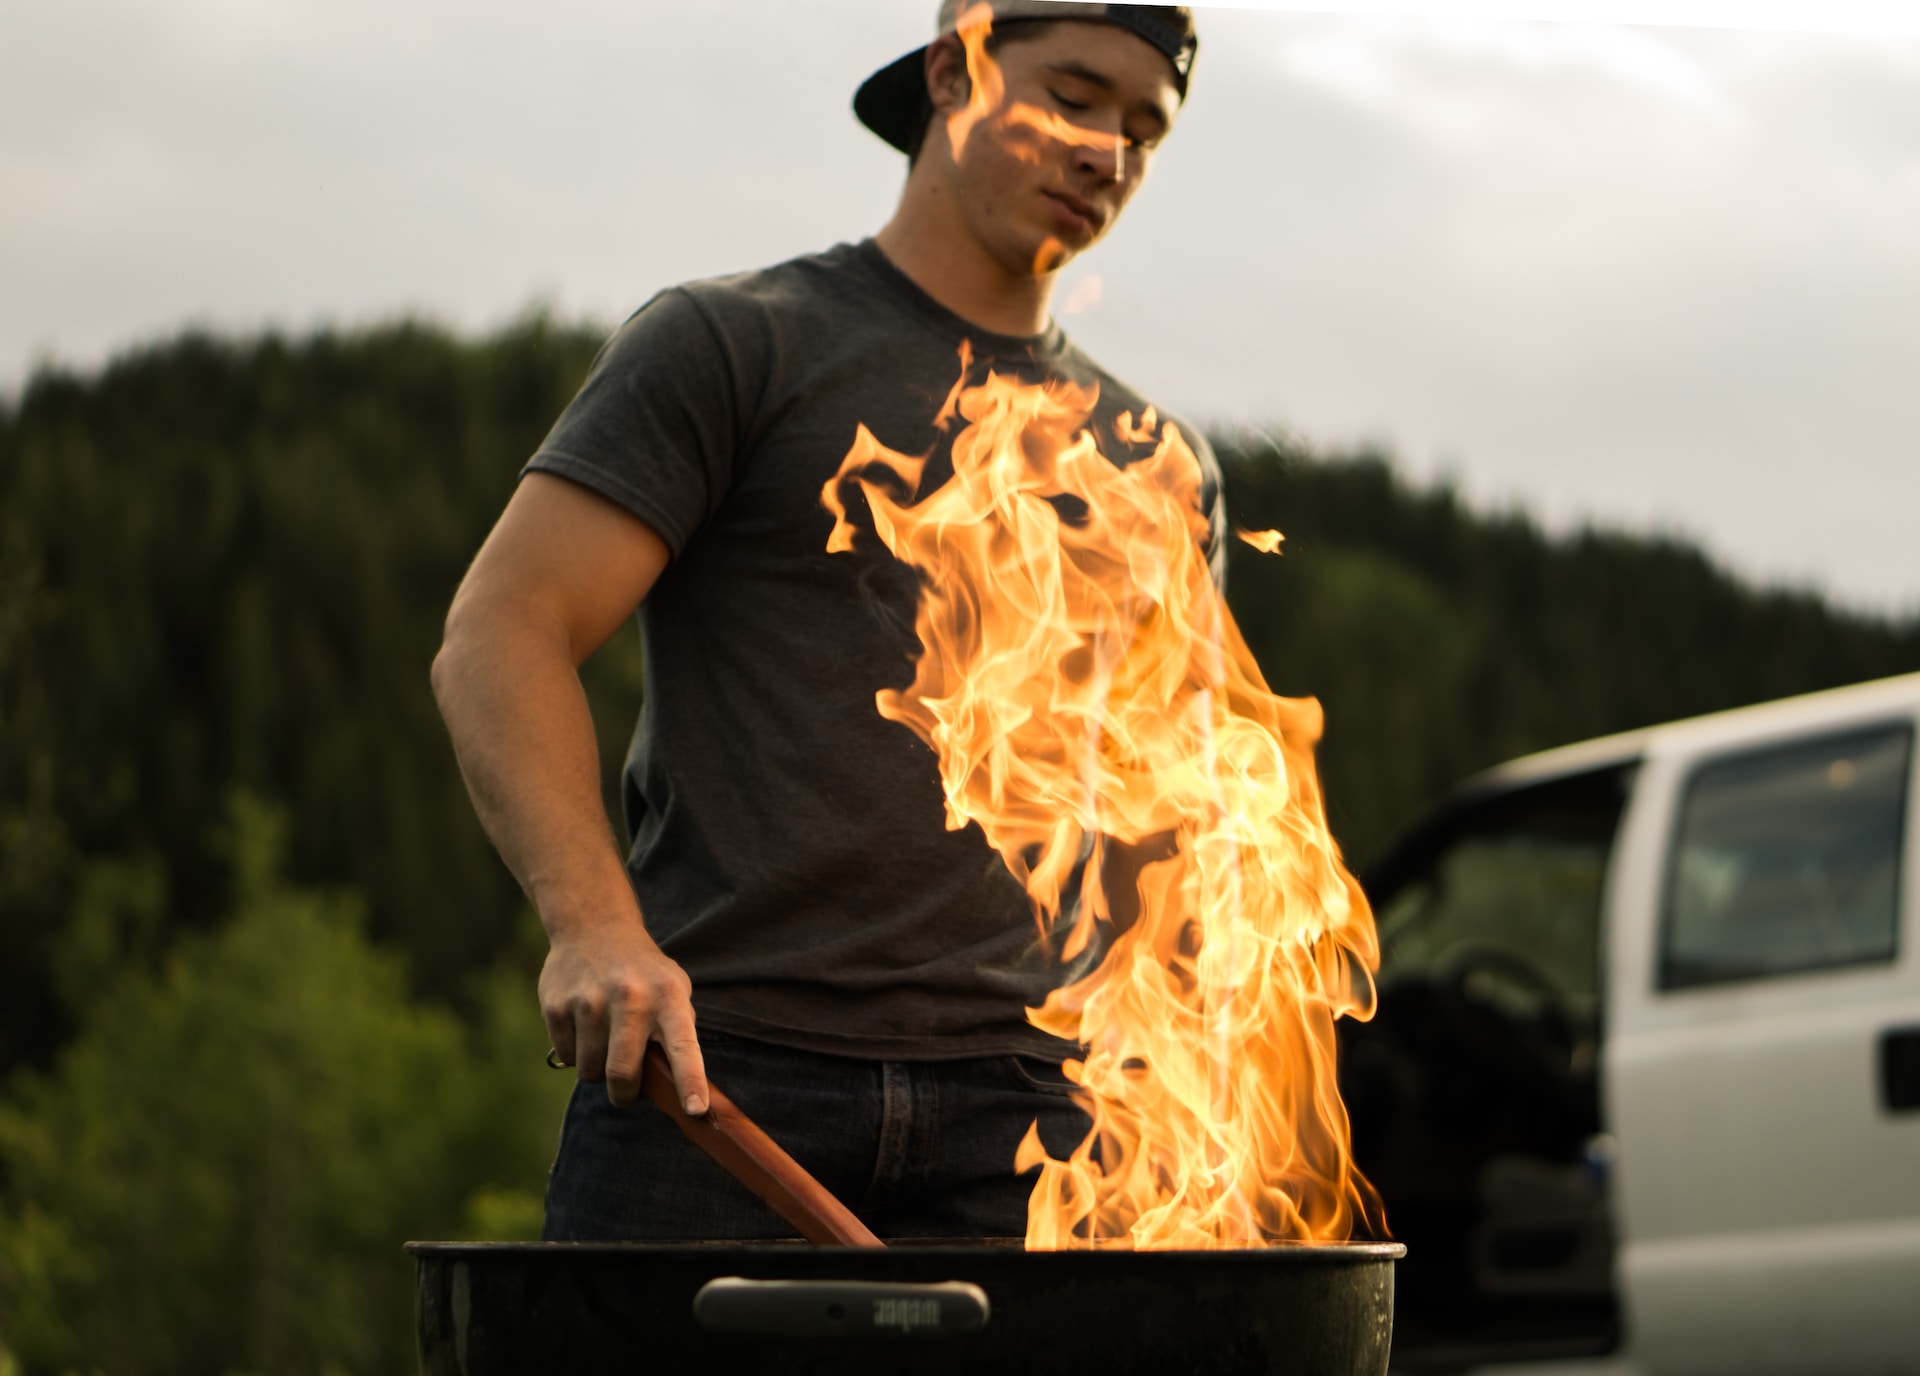 Man grilling over large flame